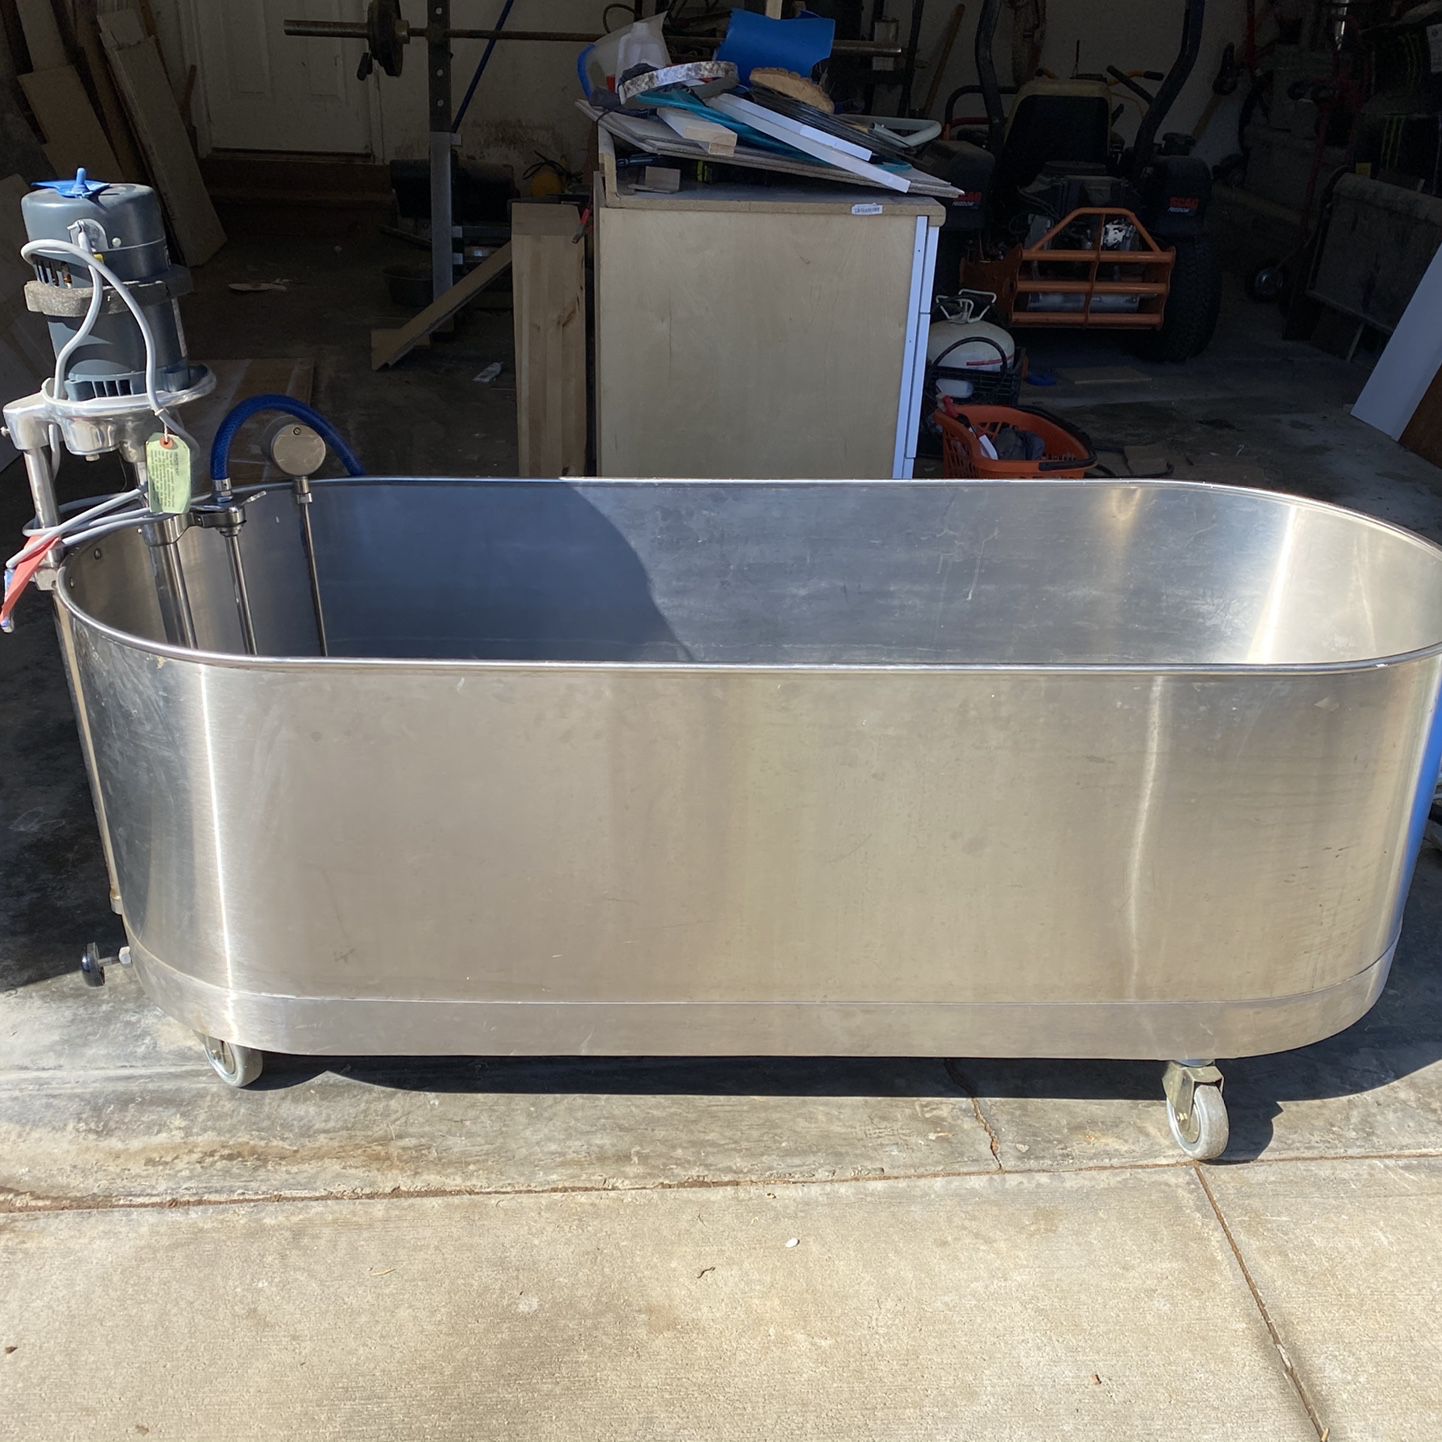 Hydrotherapy Whirlpool Tub For sale Or Trade Last Welcome 